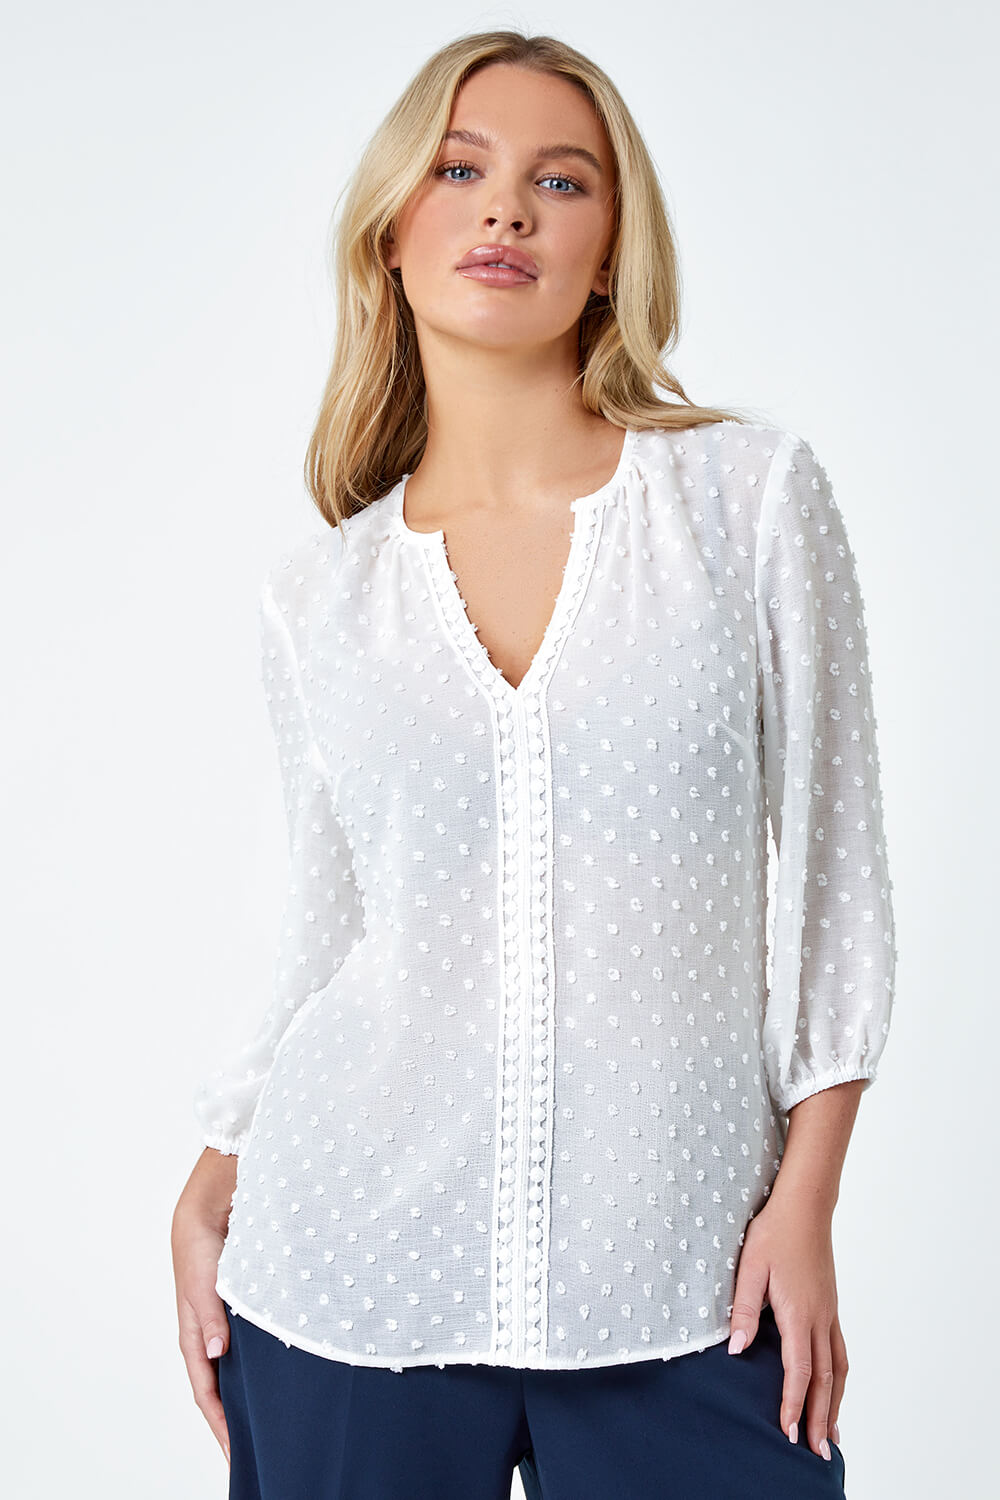 Ivory  Petite Textured Spot Print Top, Image 4 of 5